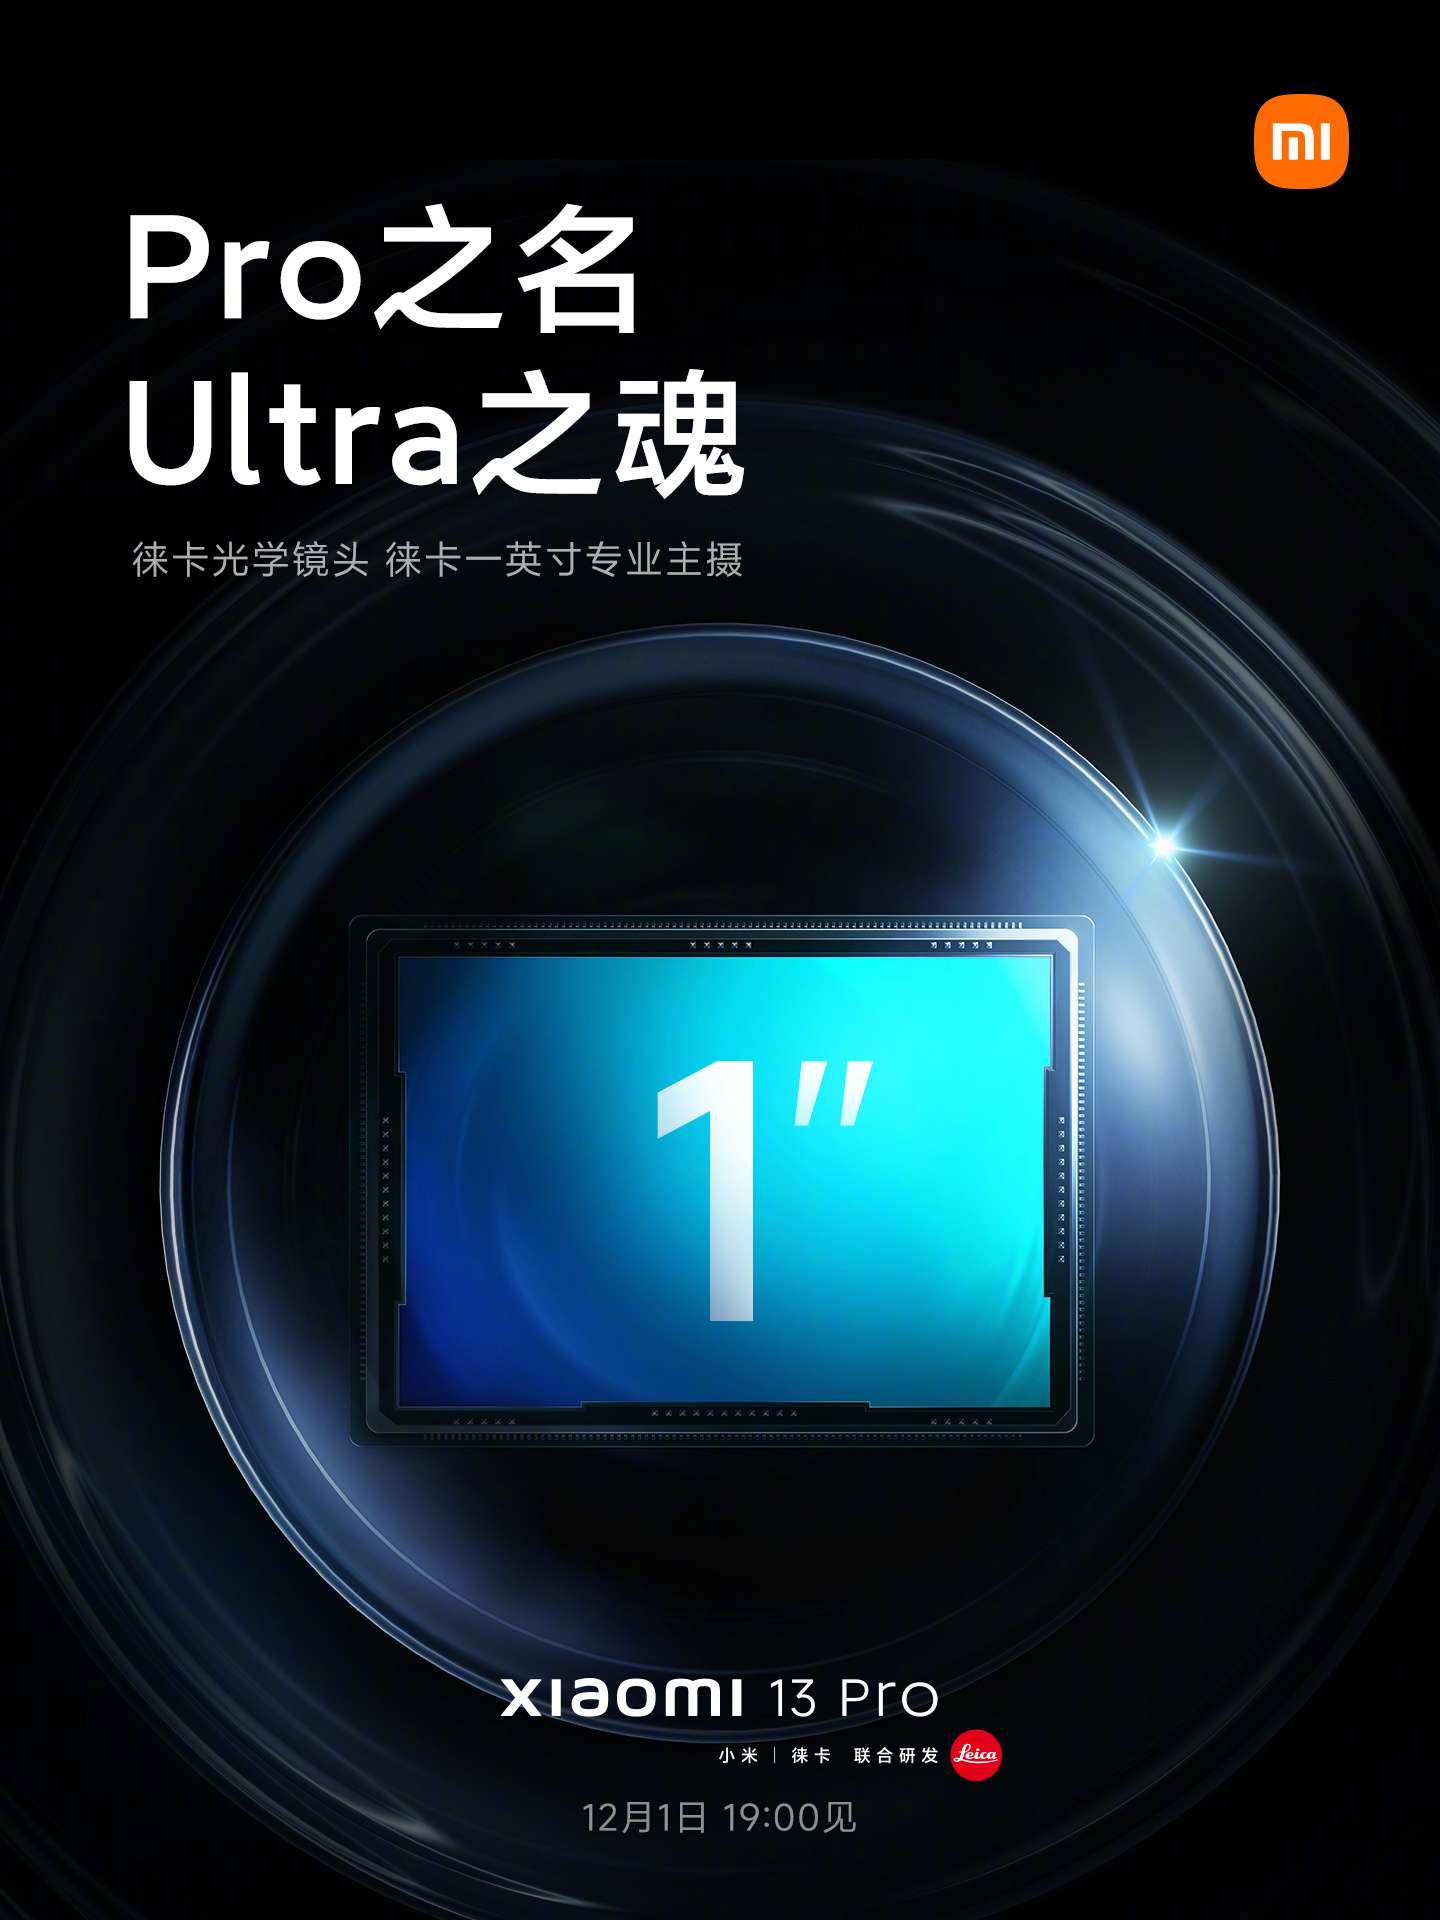 Xiaomi 13 Pro physical images revealed ahead of the launch date - Image 5.